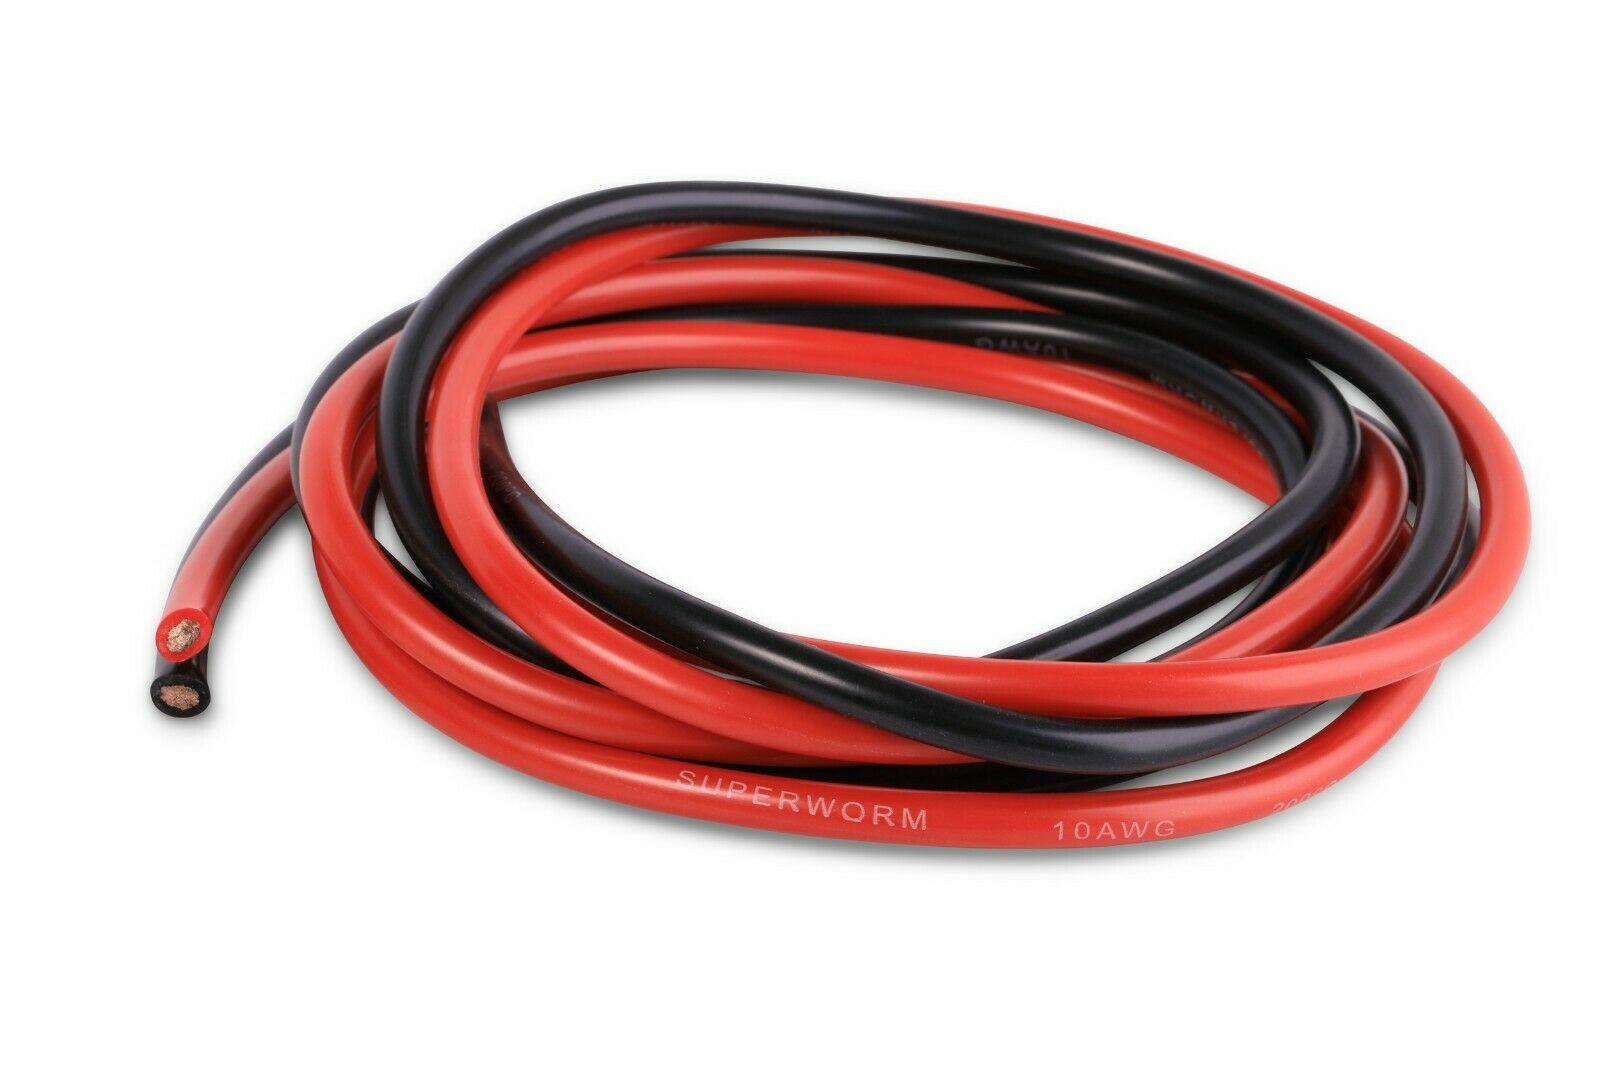 10 Gauge Silicone Wire 10 feet - 10 AWG Silicone Wire - Flexible Silicone Wire